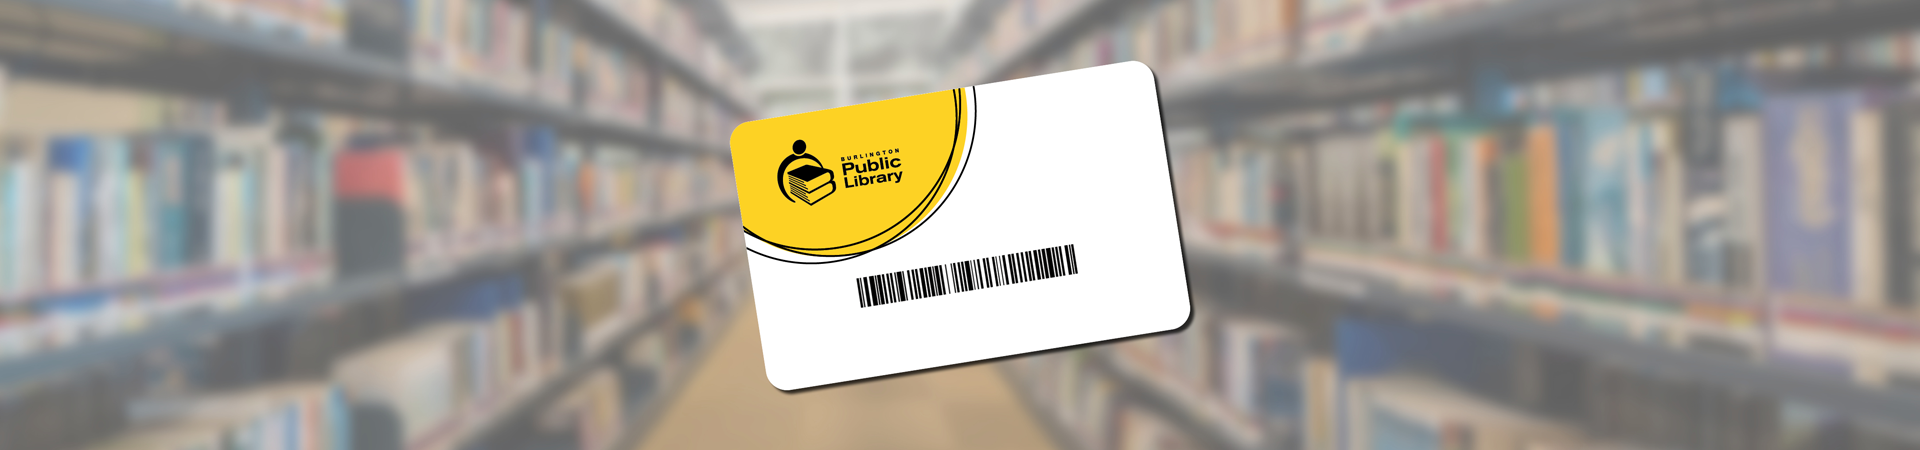 BPL library card superimposed on a blurred background of bookshelves